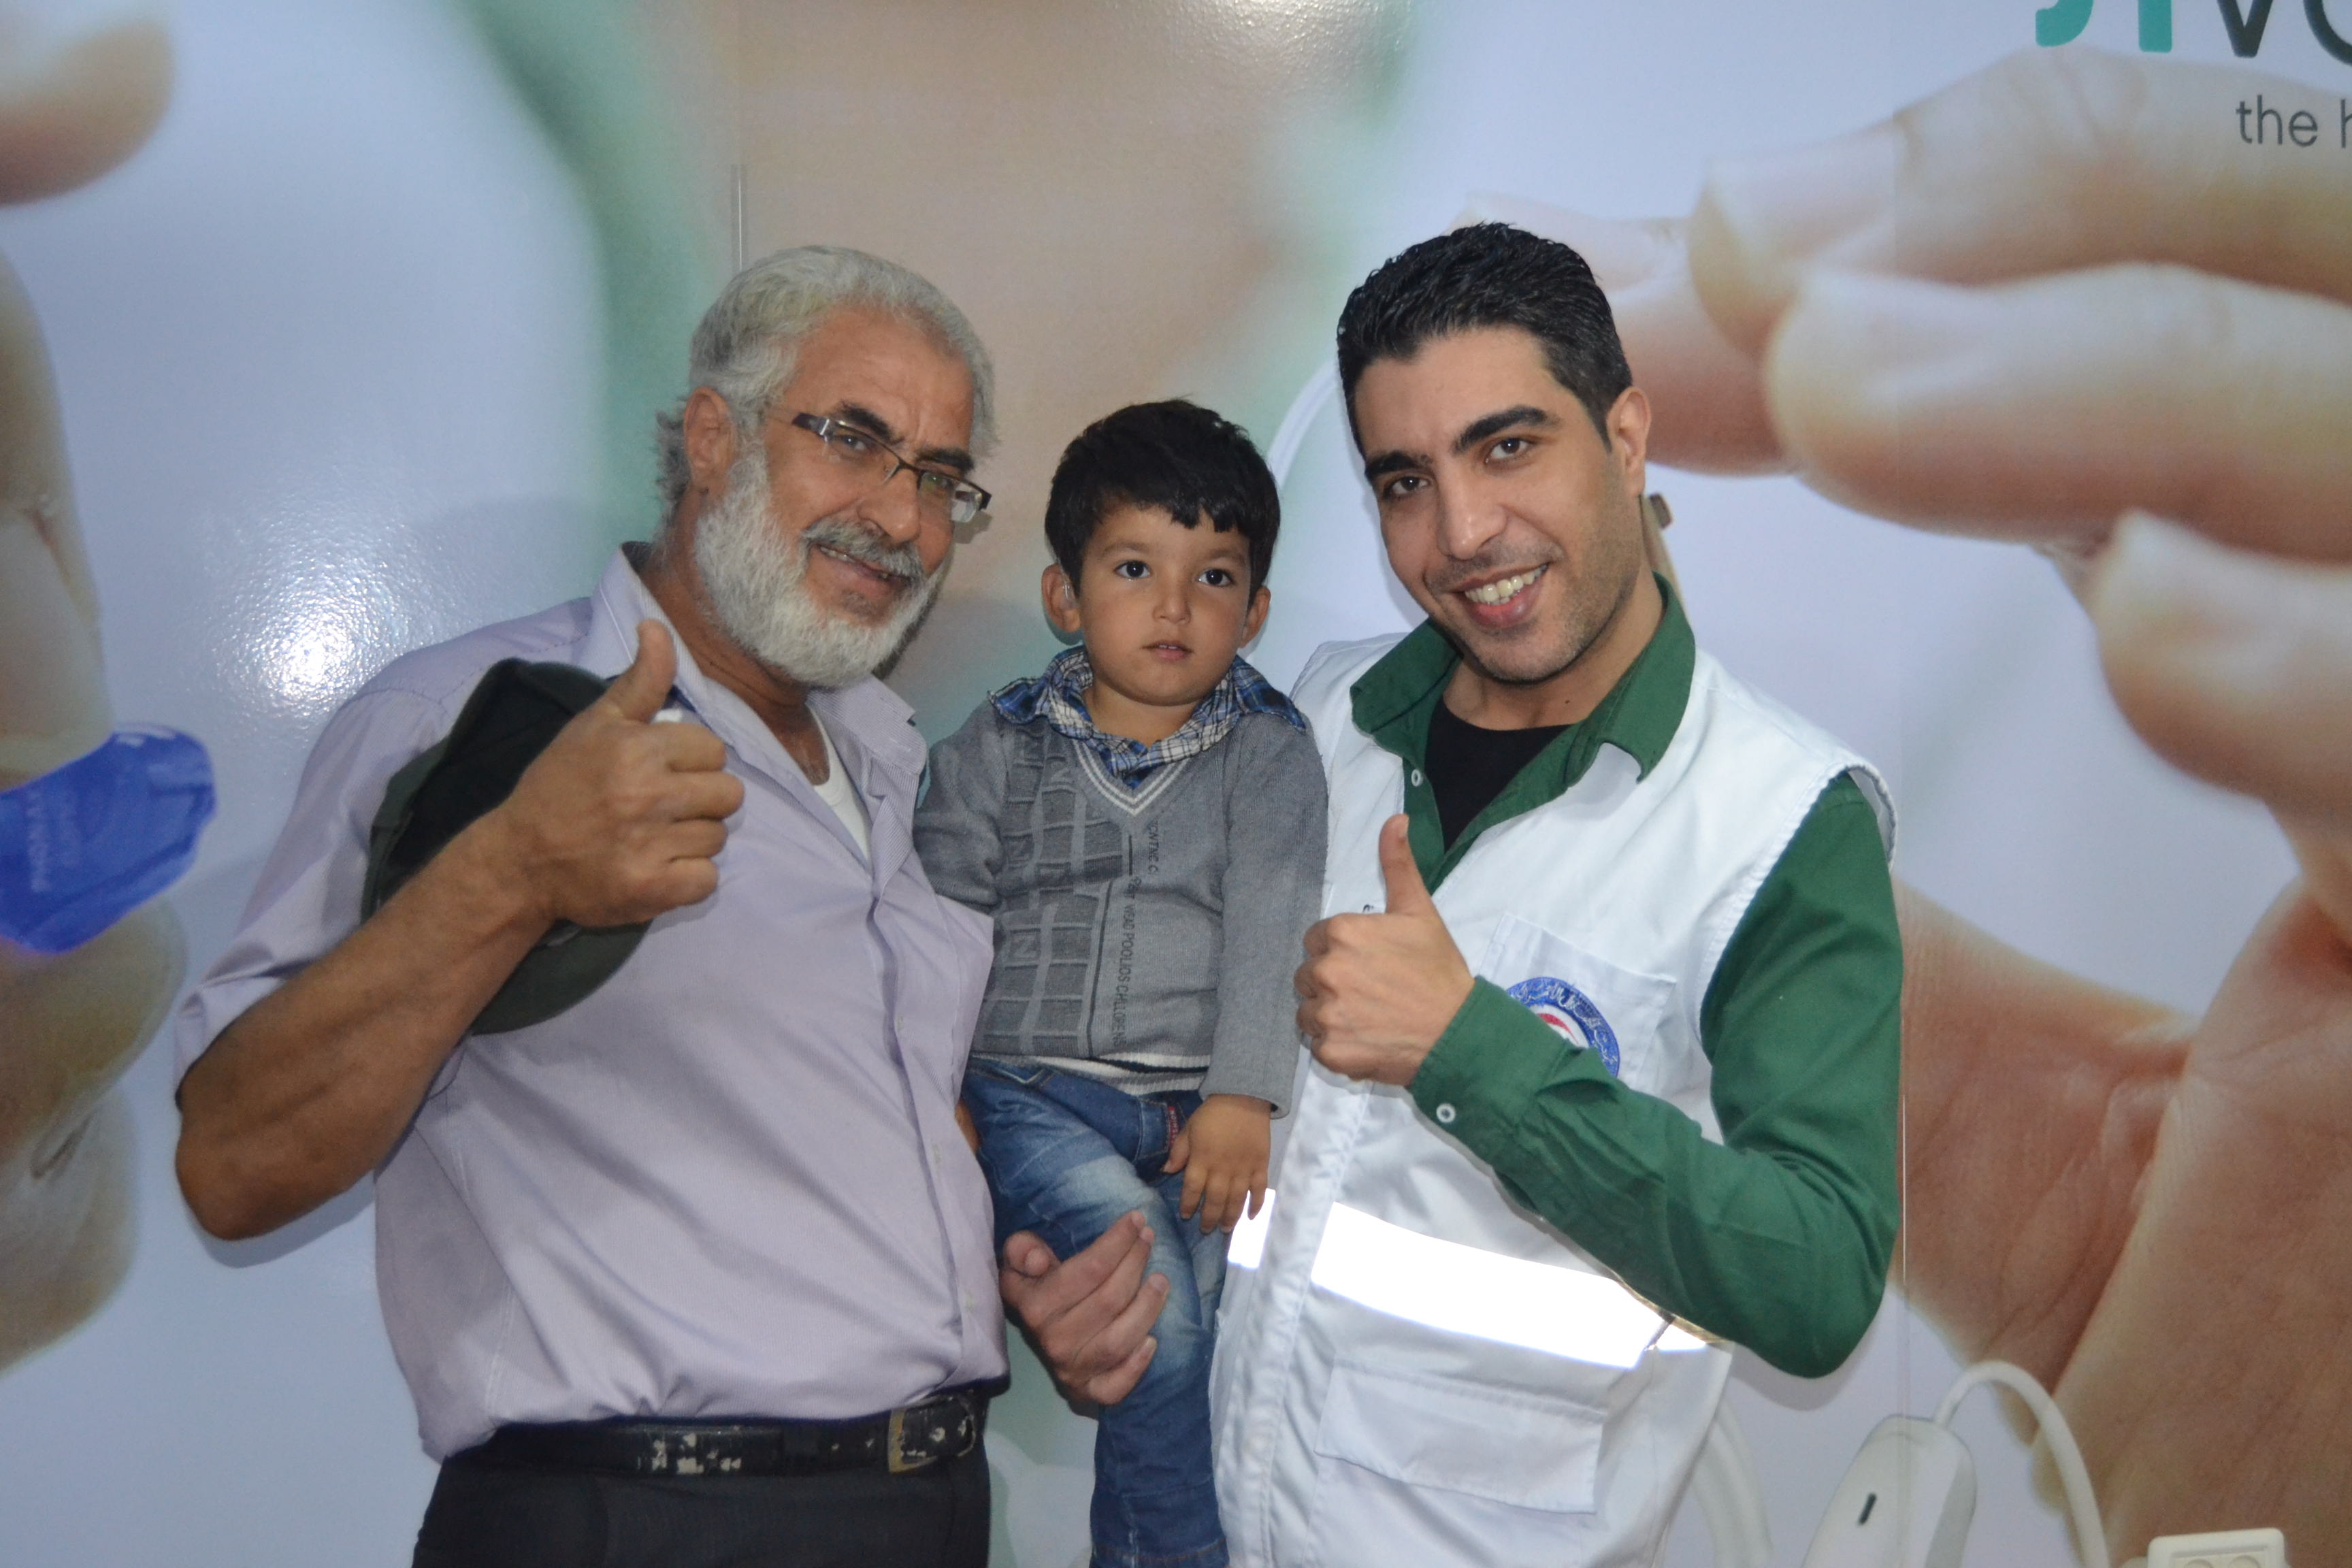 KRCS carries out complex medical operations for dozens of Palestinian children